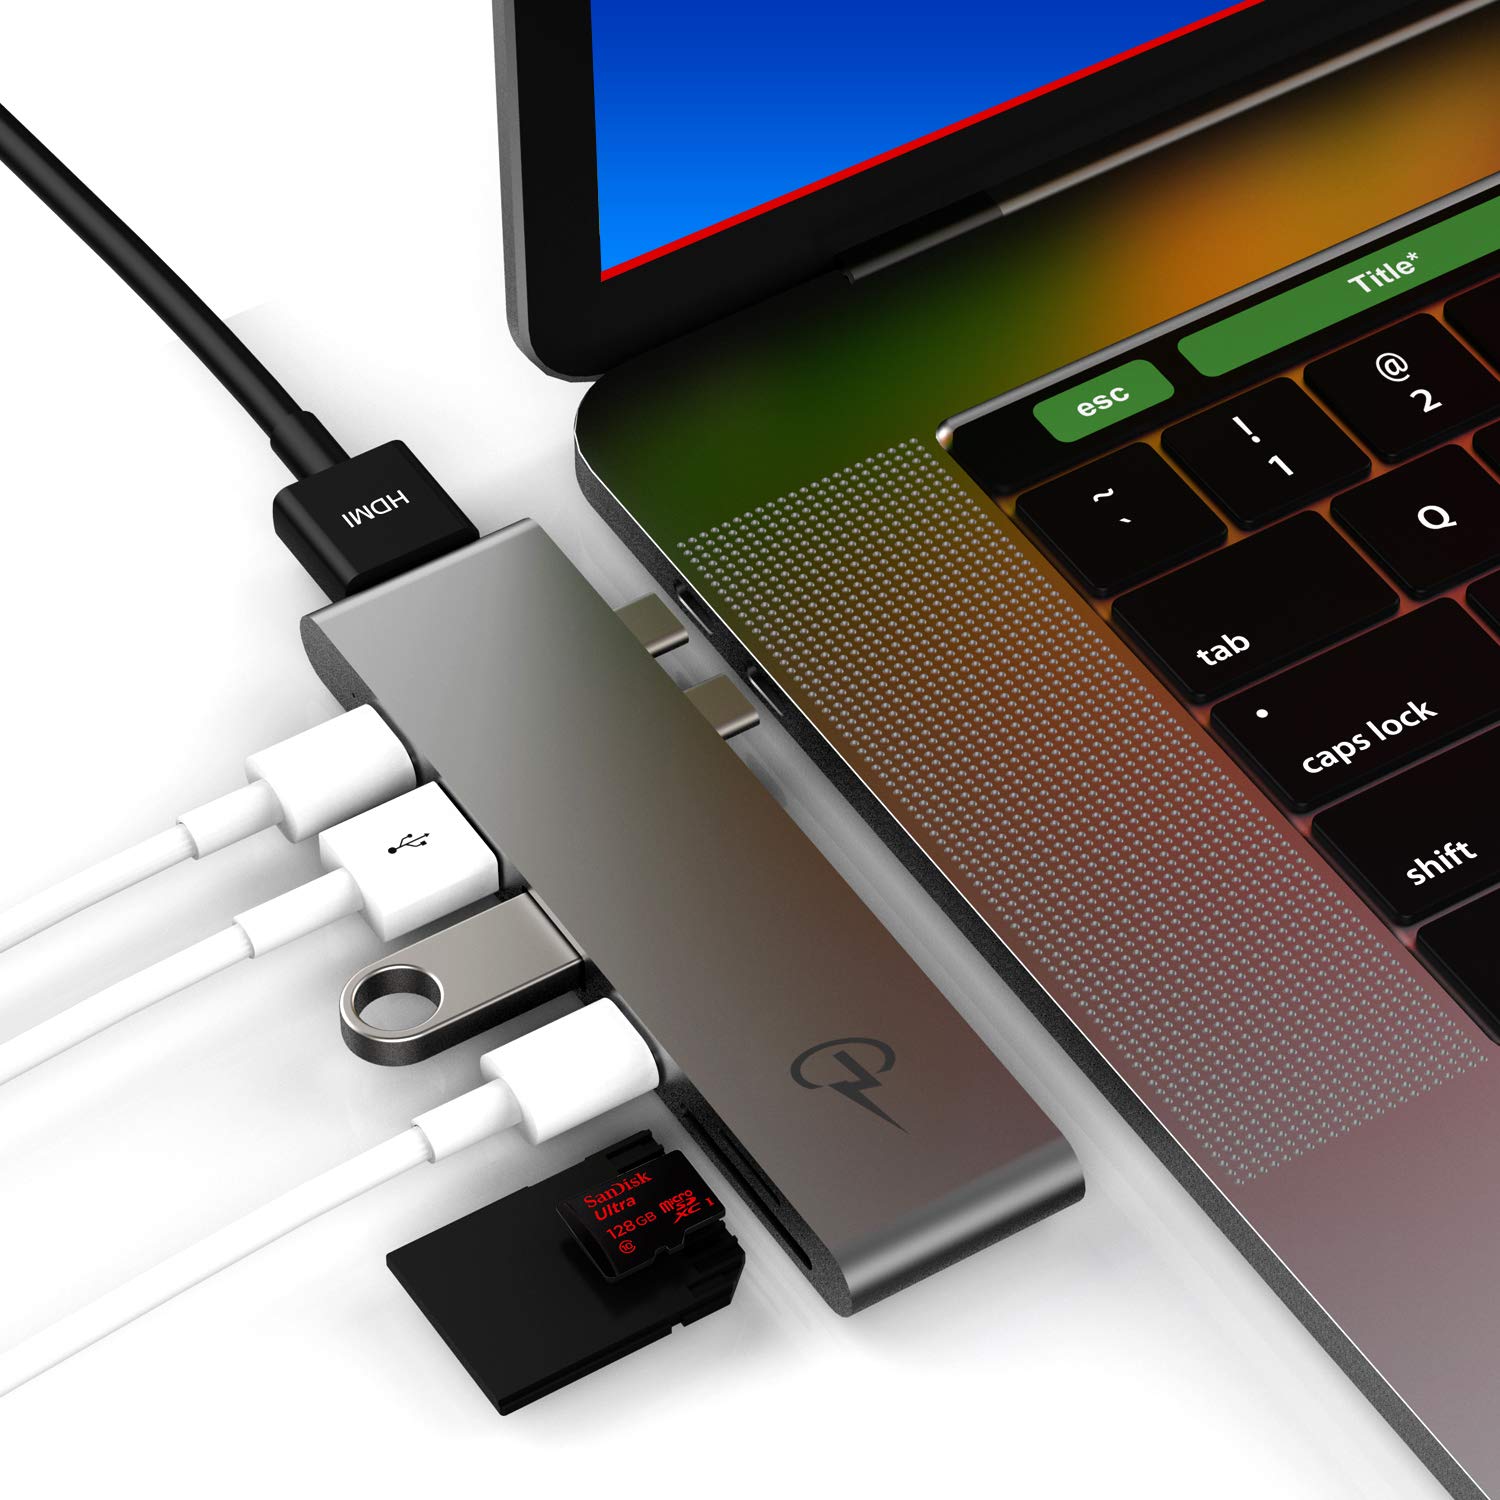 Book Cover CharJenPro USB C Adapter for MacBook Pro 16